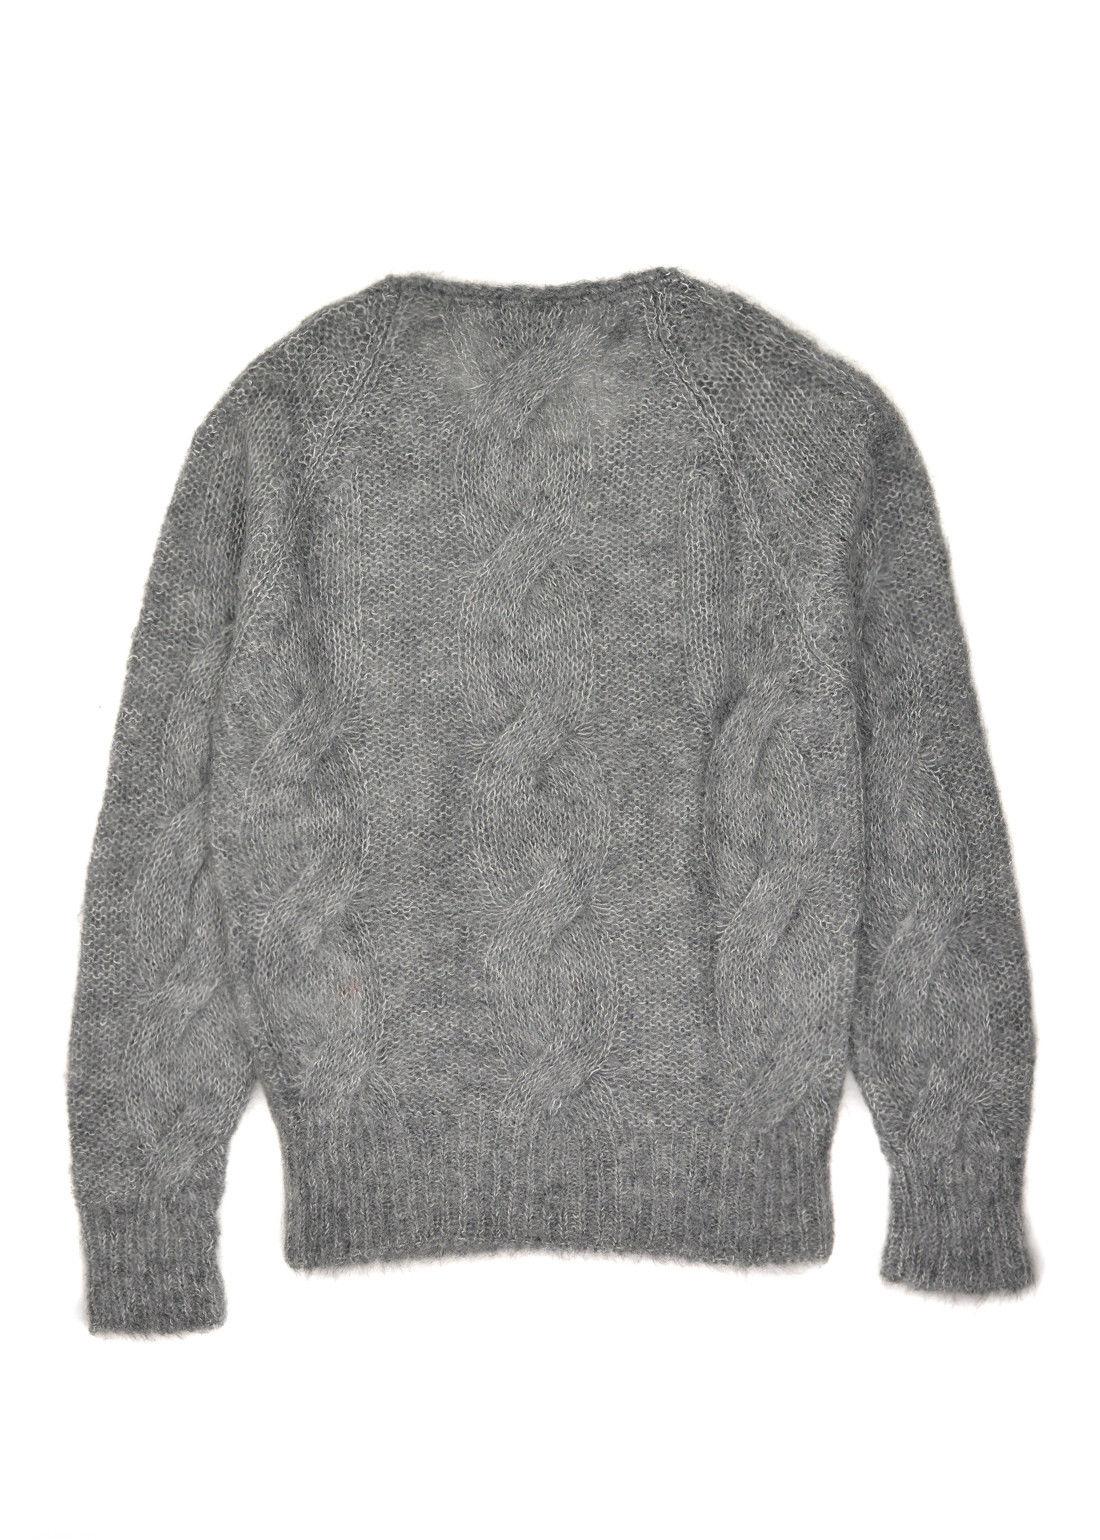 Gray Tom Ford Mens Mohair Silk Grey Crewneck Cable Knit Sweater Sz IT46/US36~RTL$1350 For Sale